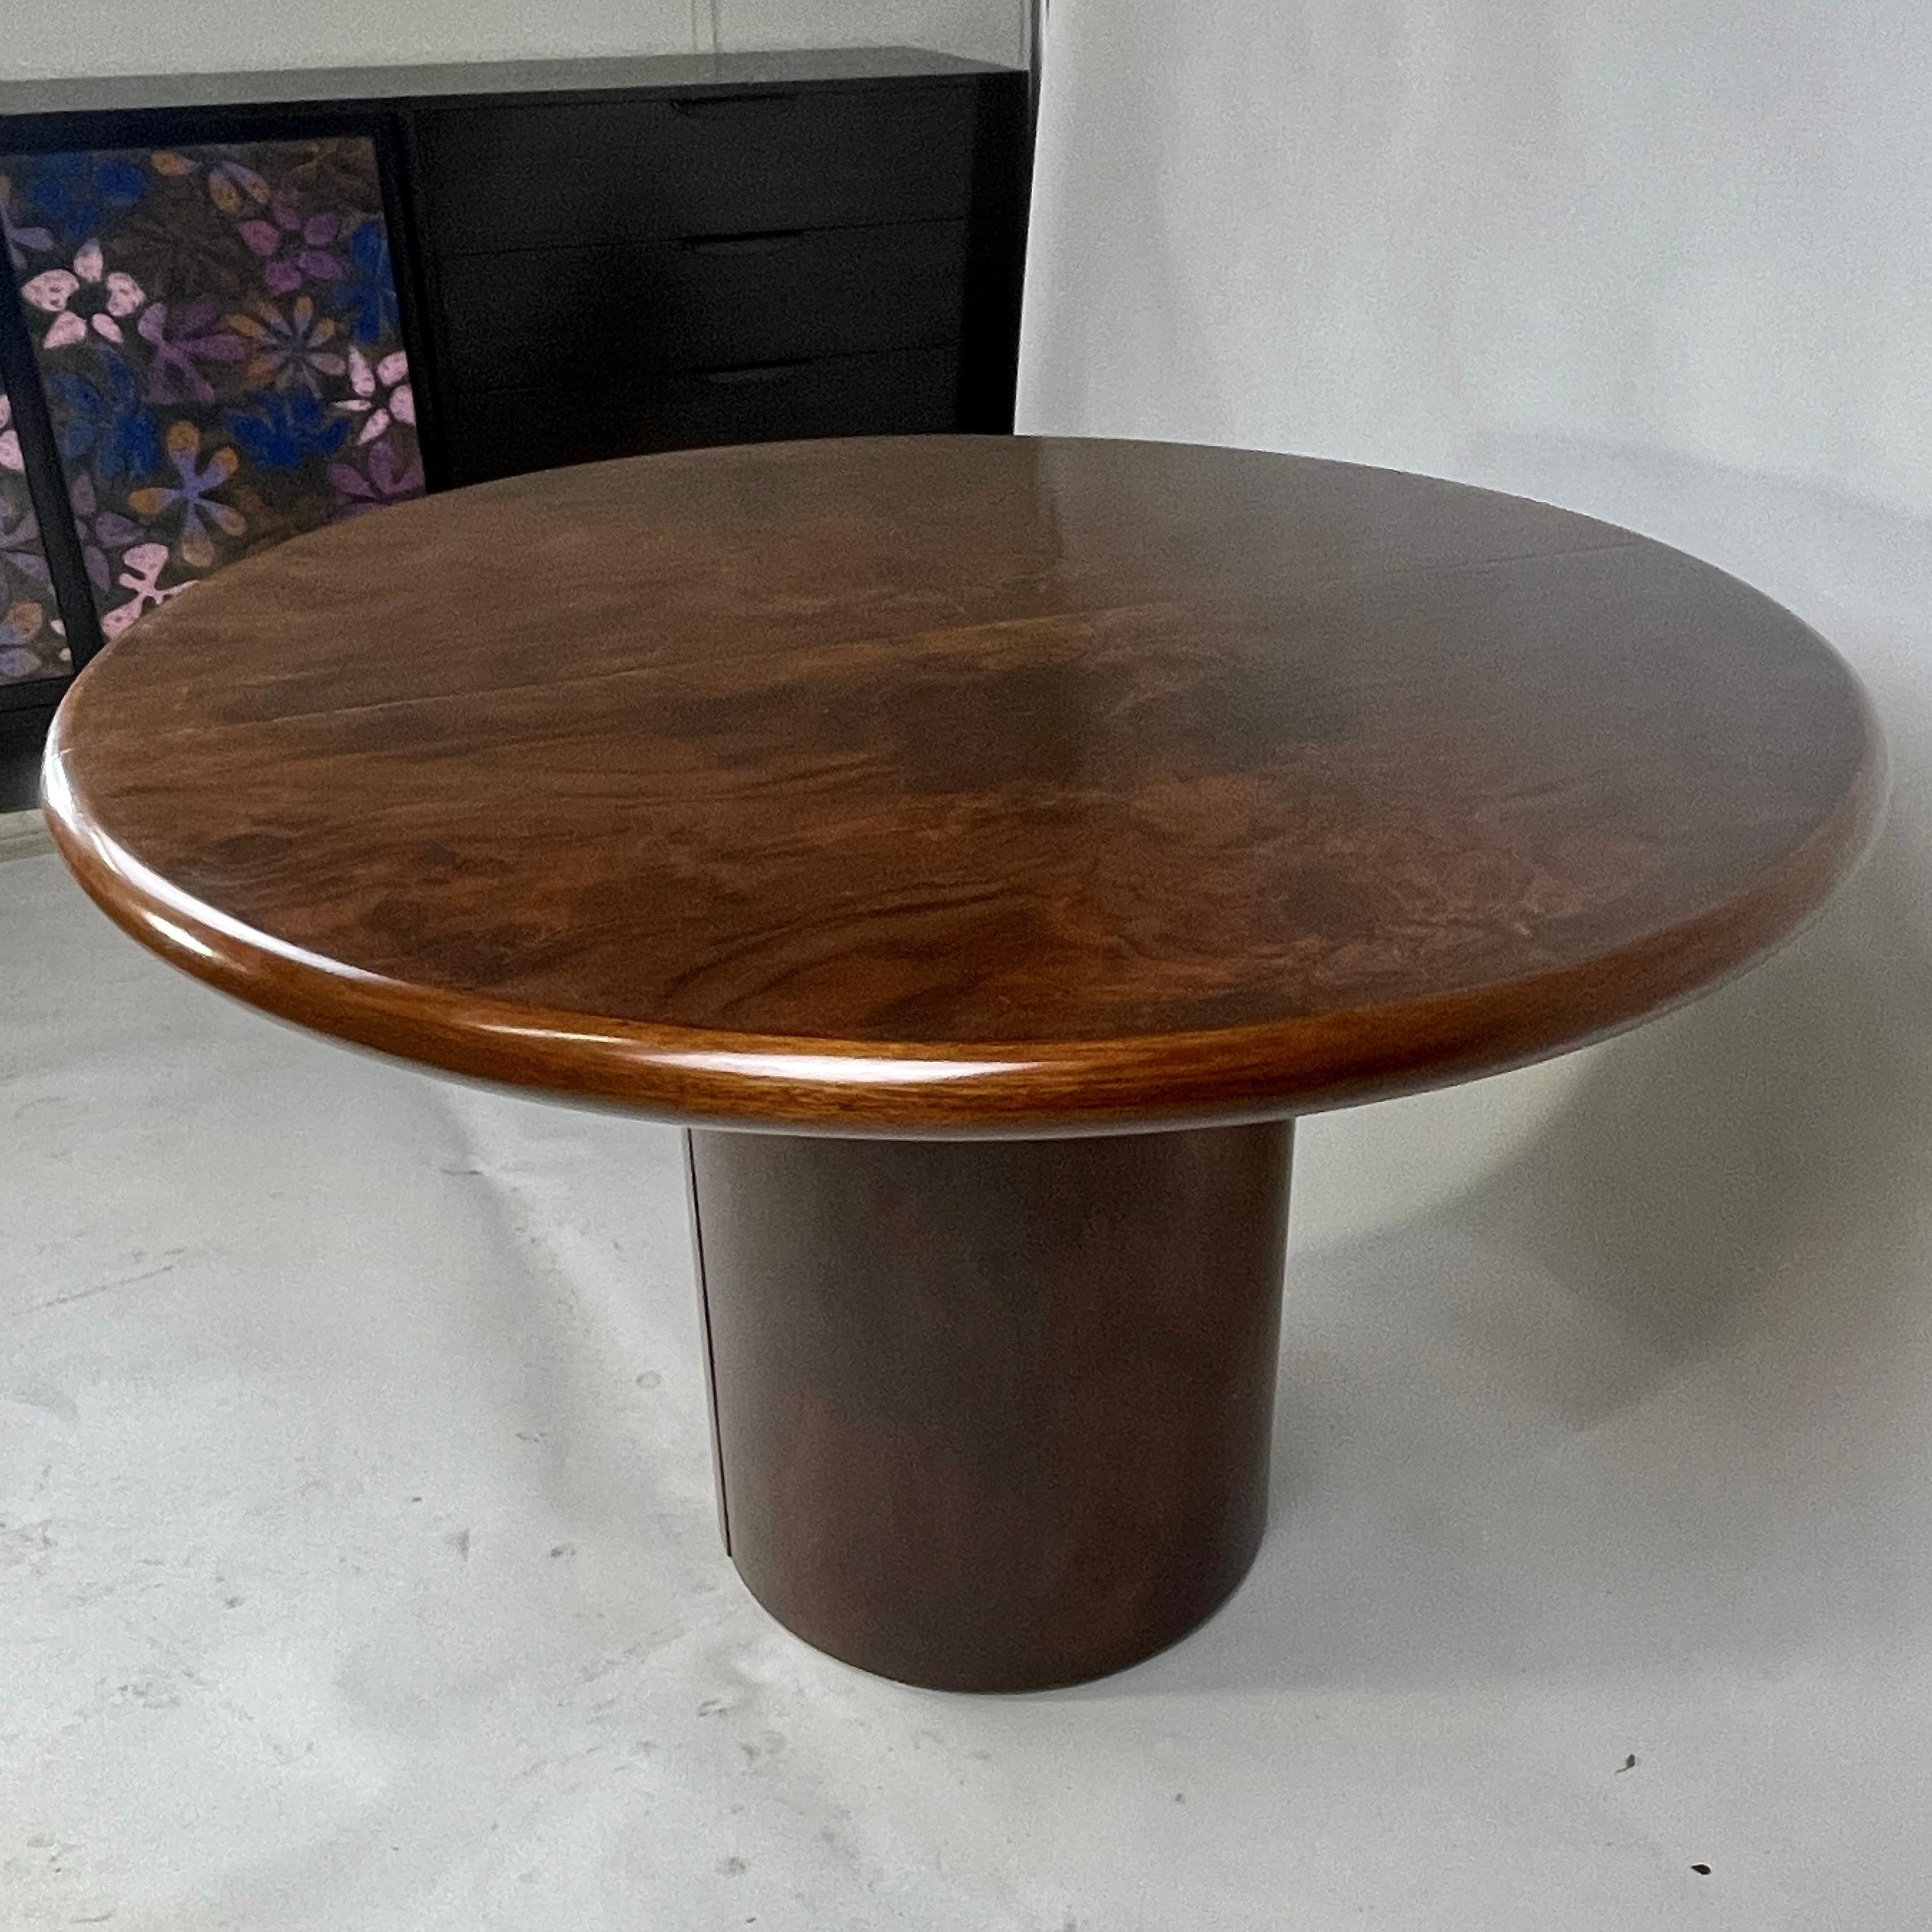 Absolutely stunning freshly refinished Burled mahogany table designed by Paul Mayen for Intrex. Smart simple cylindrical shape leaves all the detail in the natural beauty of the amazing action on this exemplary example of a rare burled mahogany. The